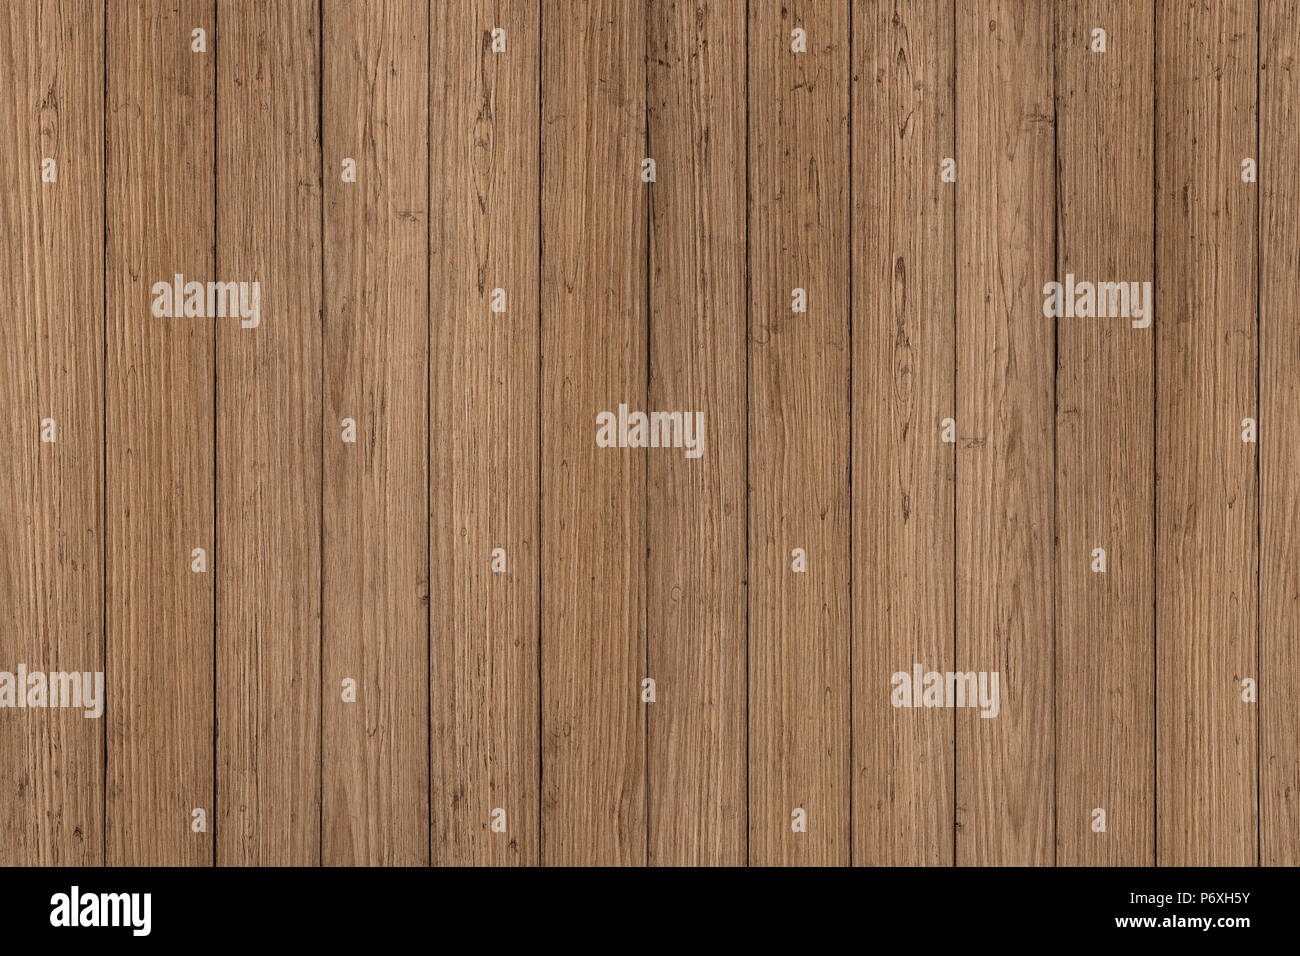 Old wood rustic background. Wood texture background Stock Photo